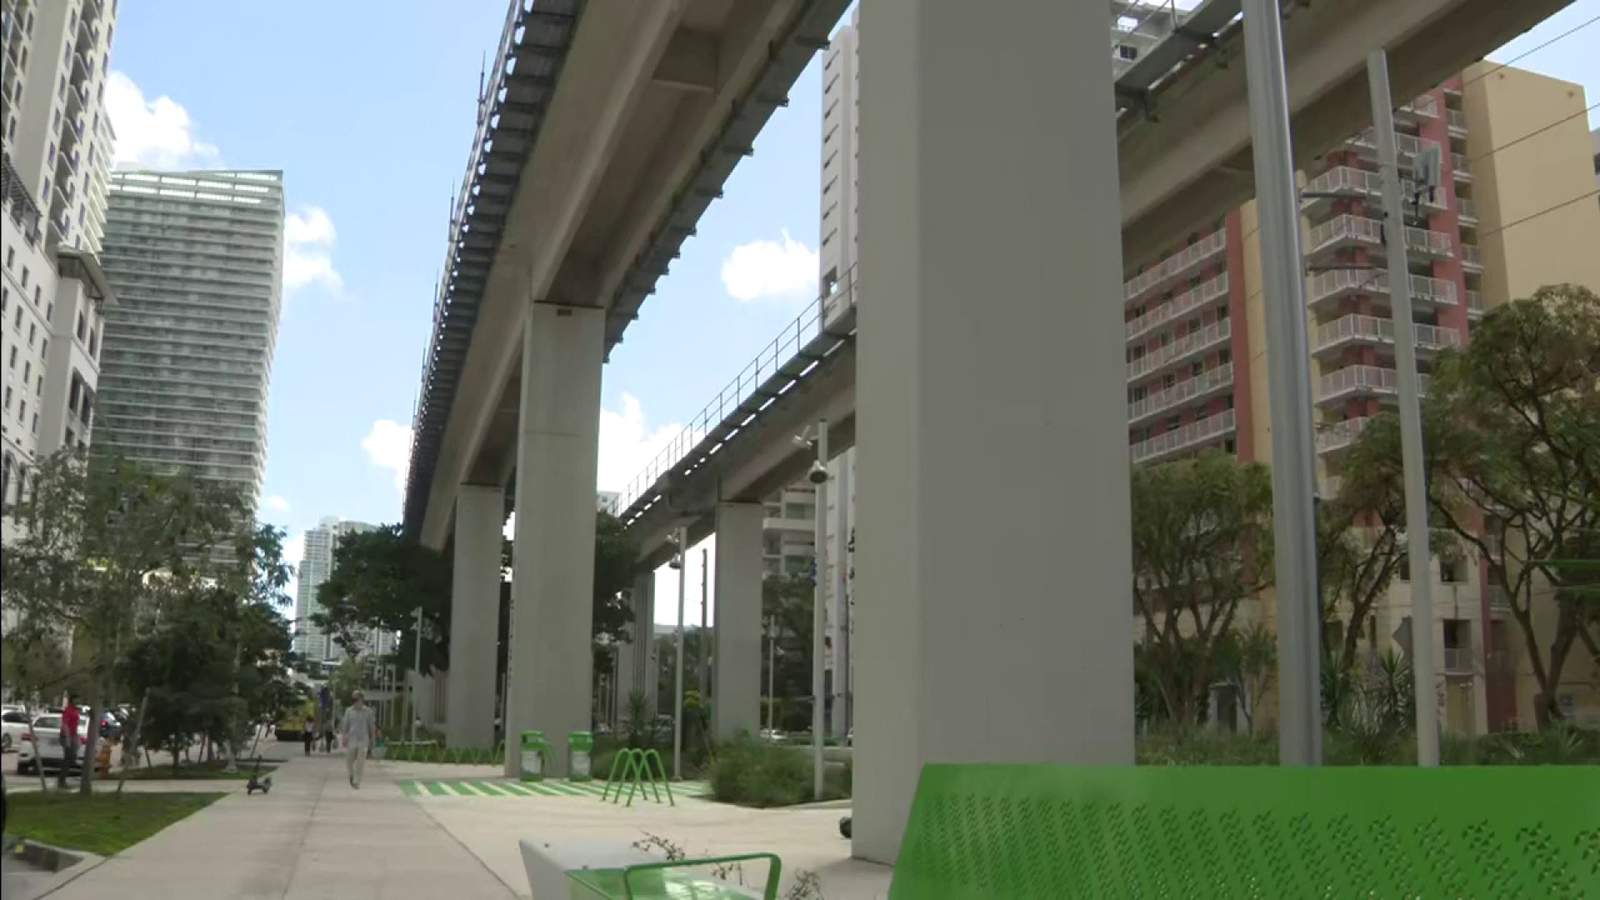 A 10-mile long park is springing up in Miami, in an unlikely place